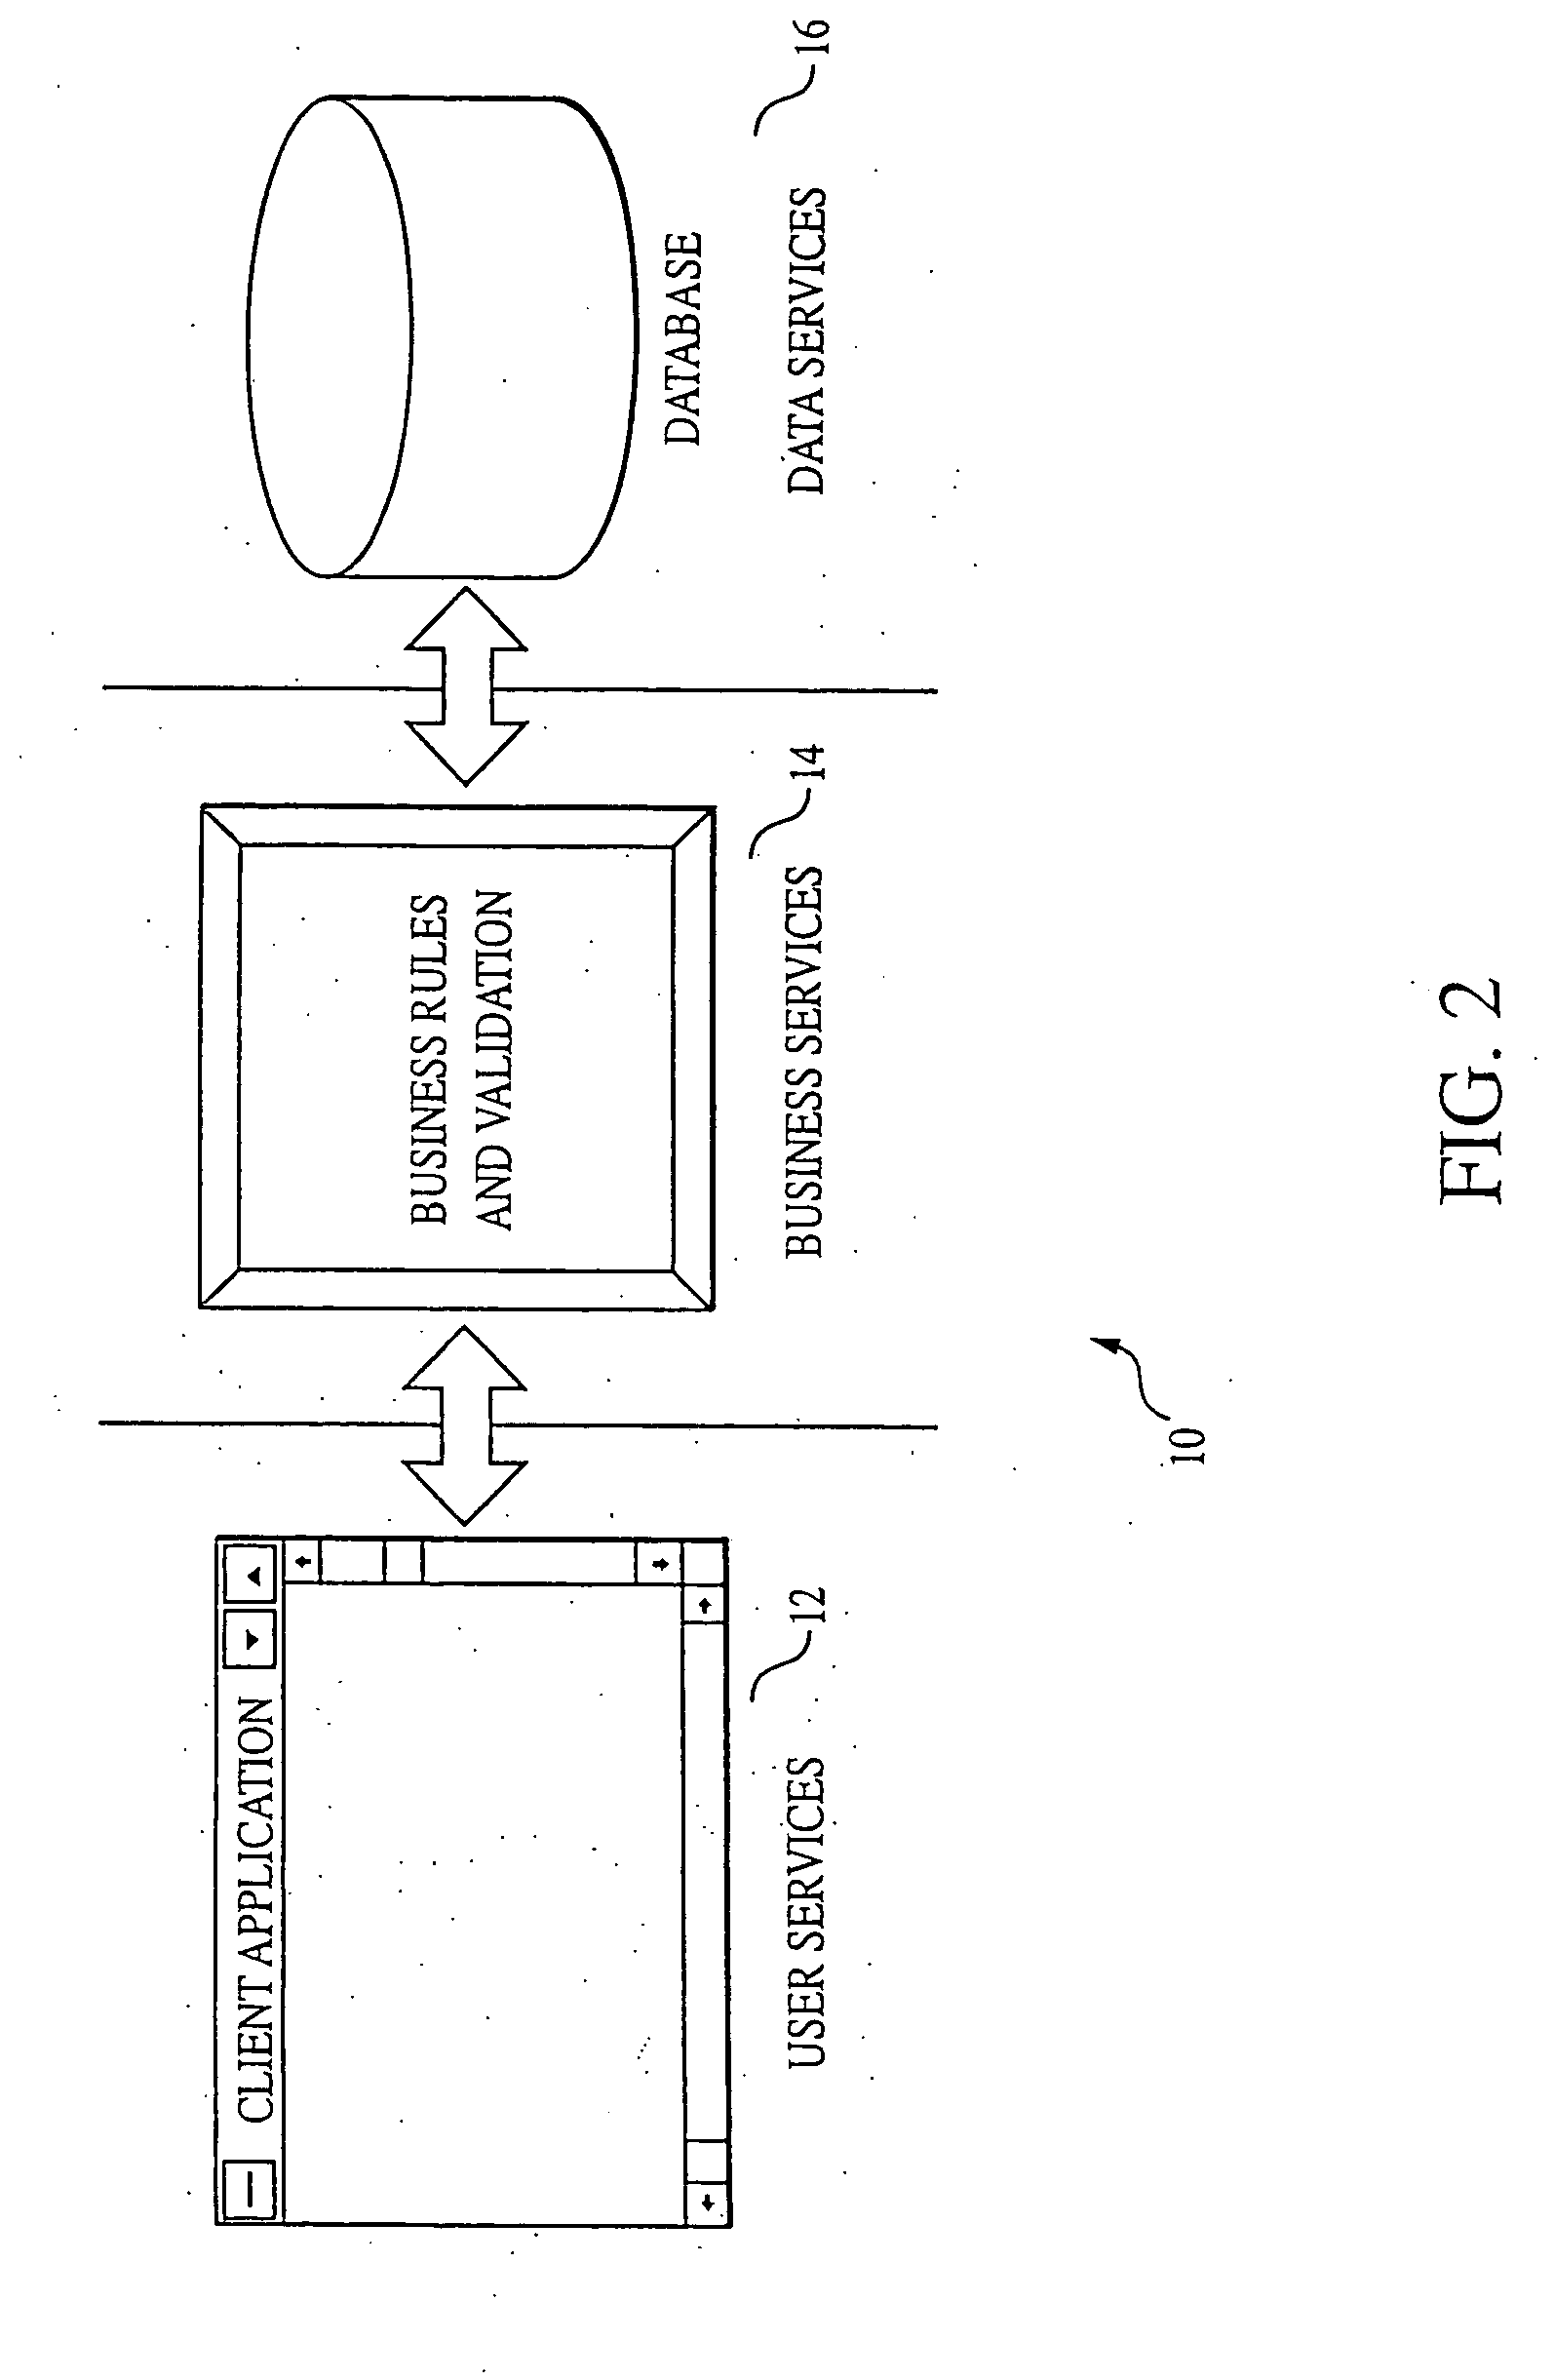 System, method, and computer program product for optimization and acceleration of data transport and processing